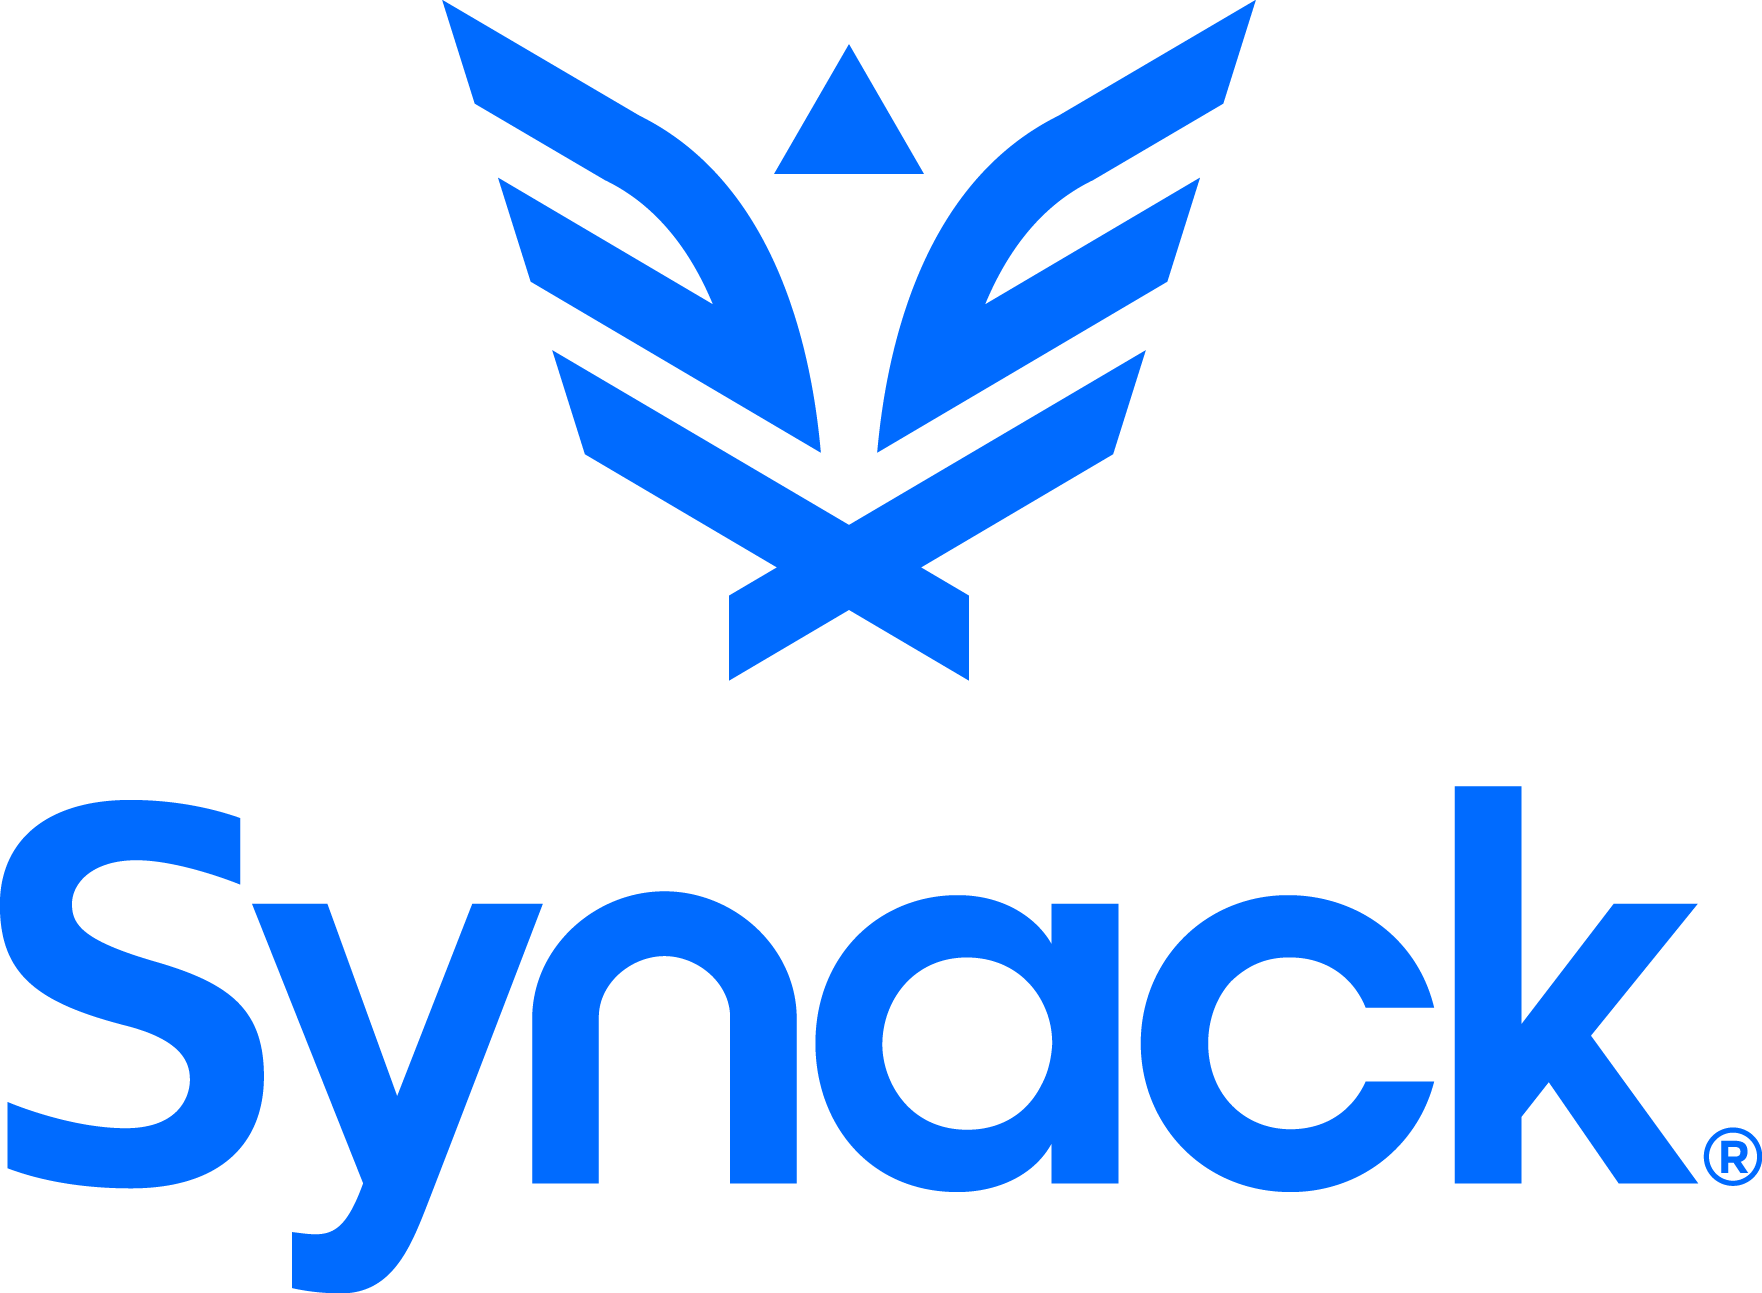 Synack